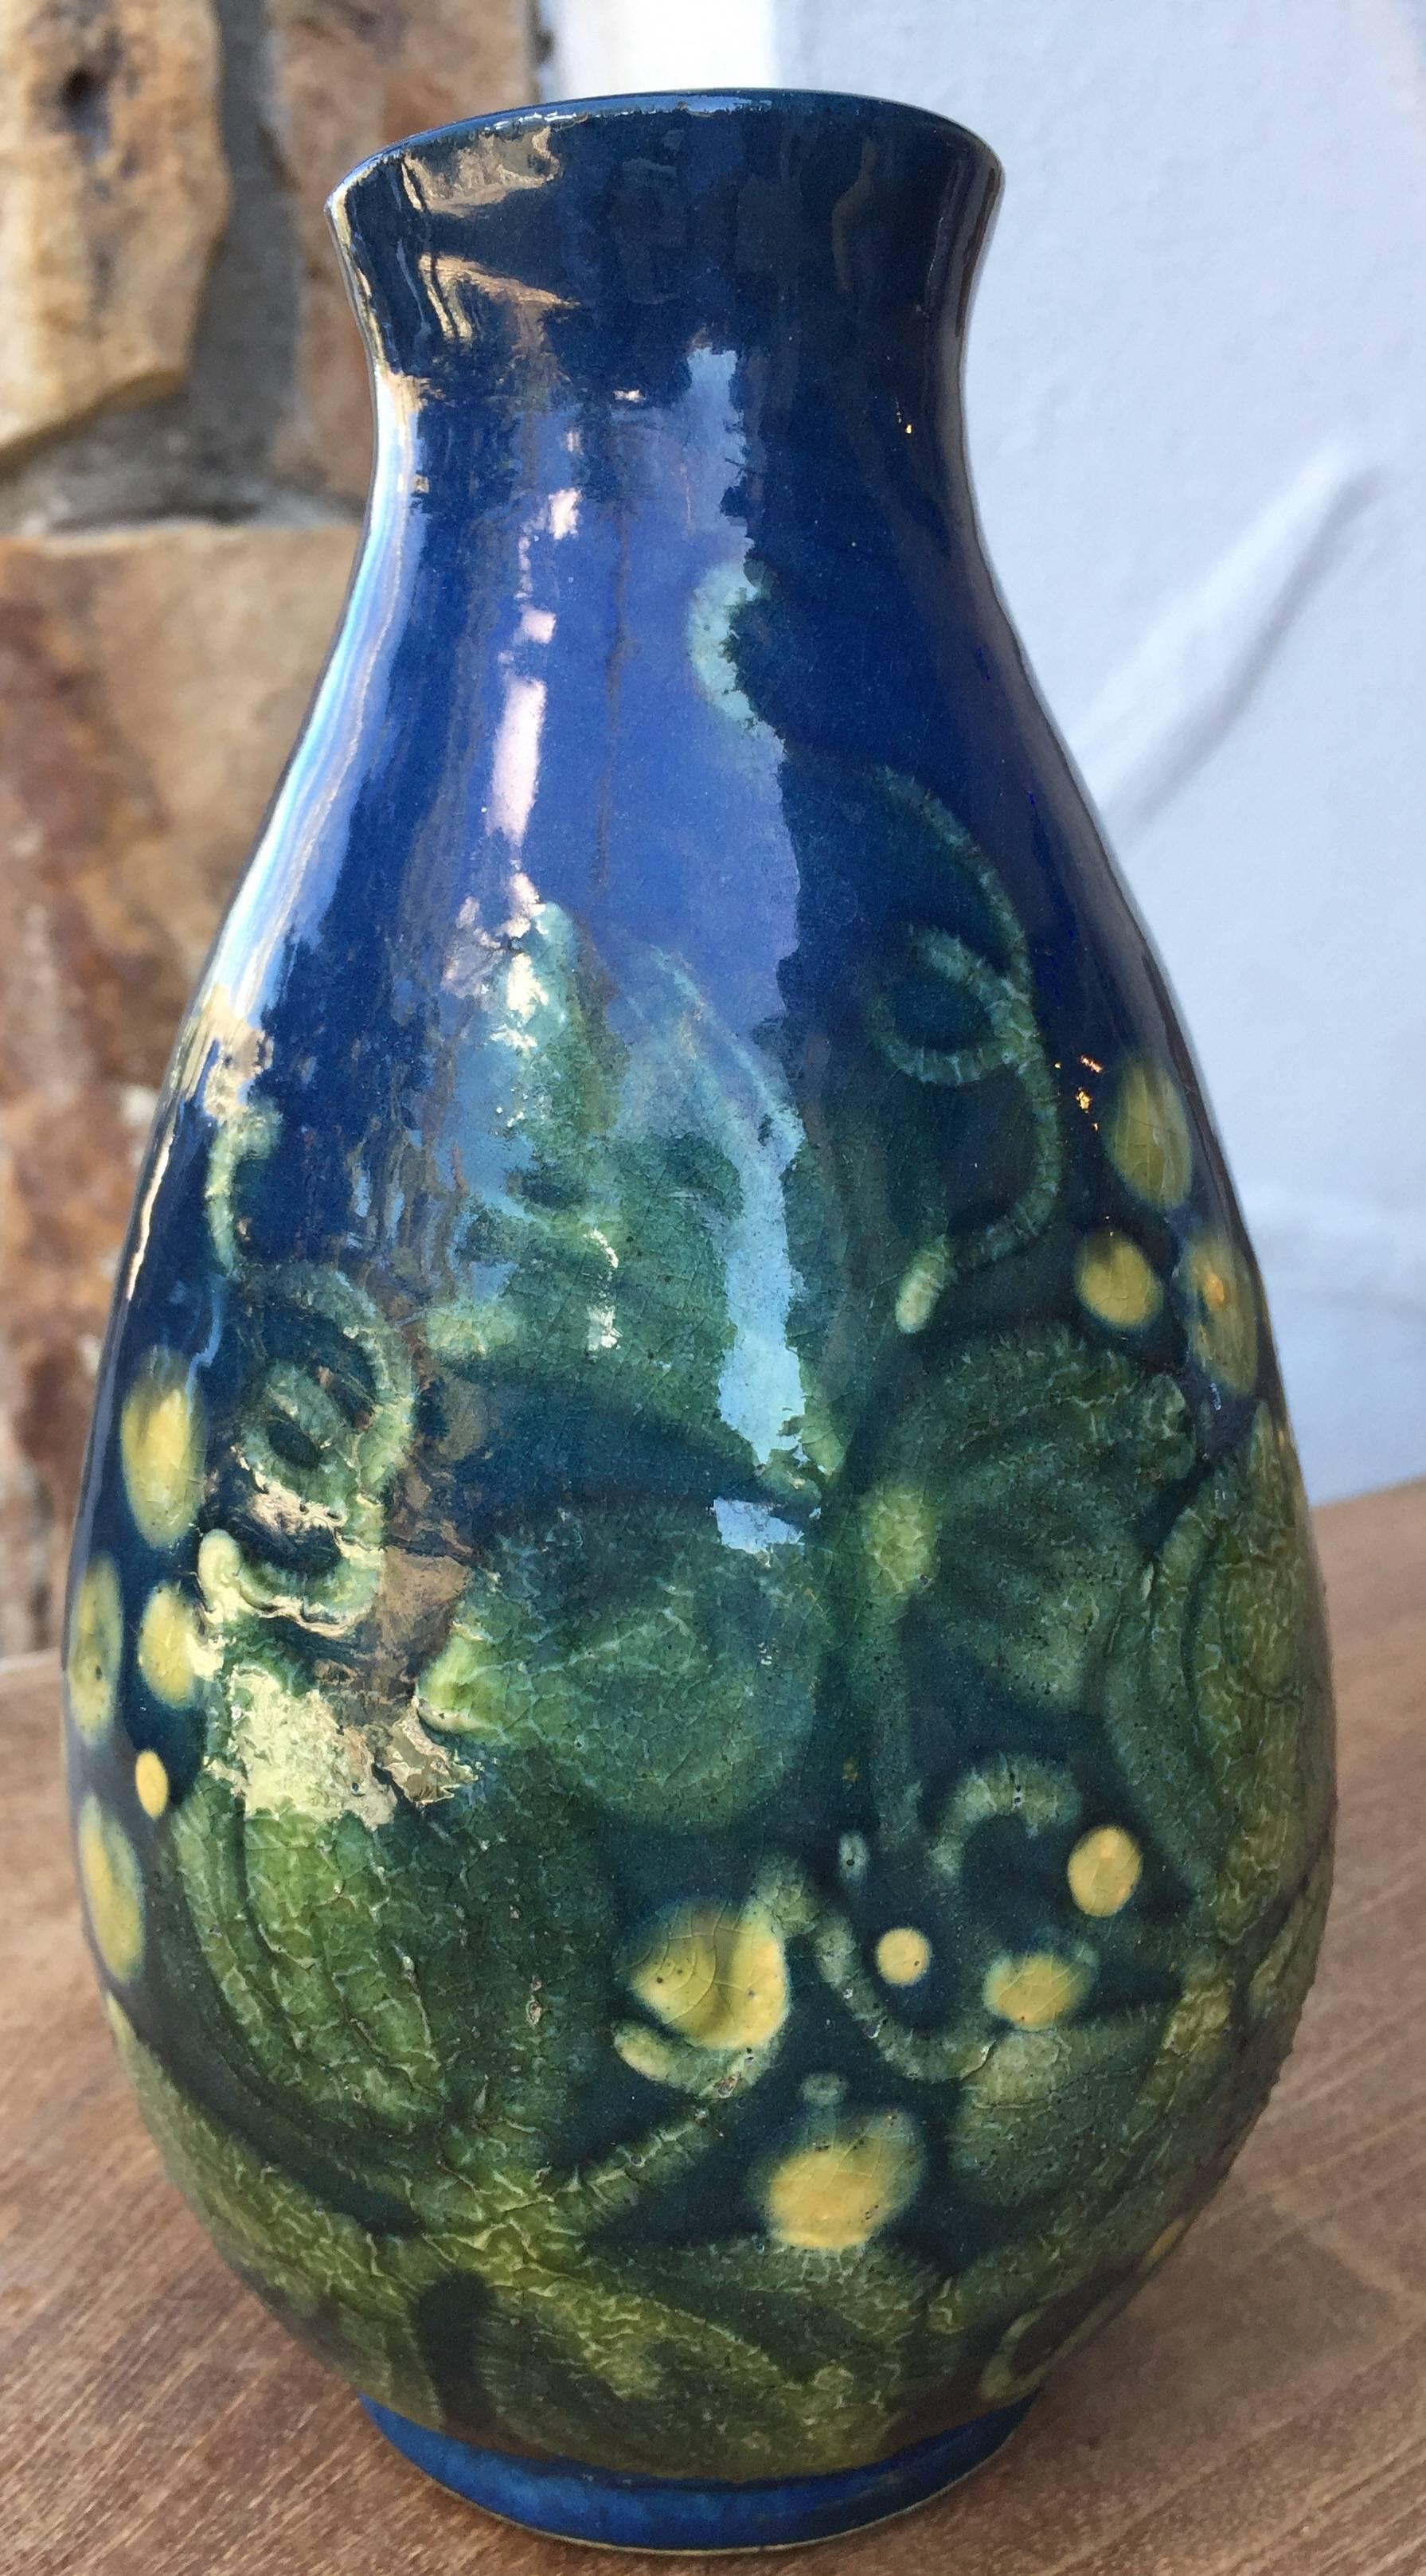 A French ceramic vase. Bulbous form base tapers upwards to a round opening. Body of vase is decorated with green and faint ivory floral motifs over a dark blue ground. Underside is impressed 